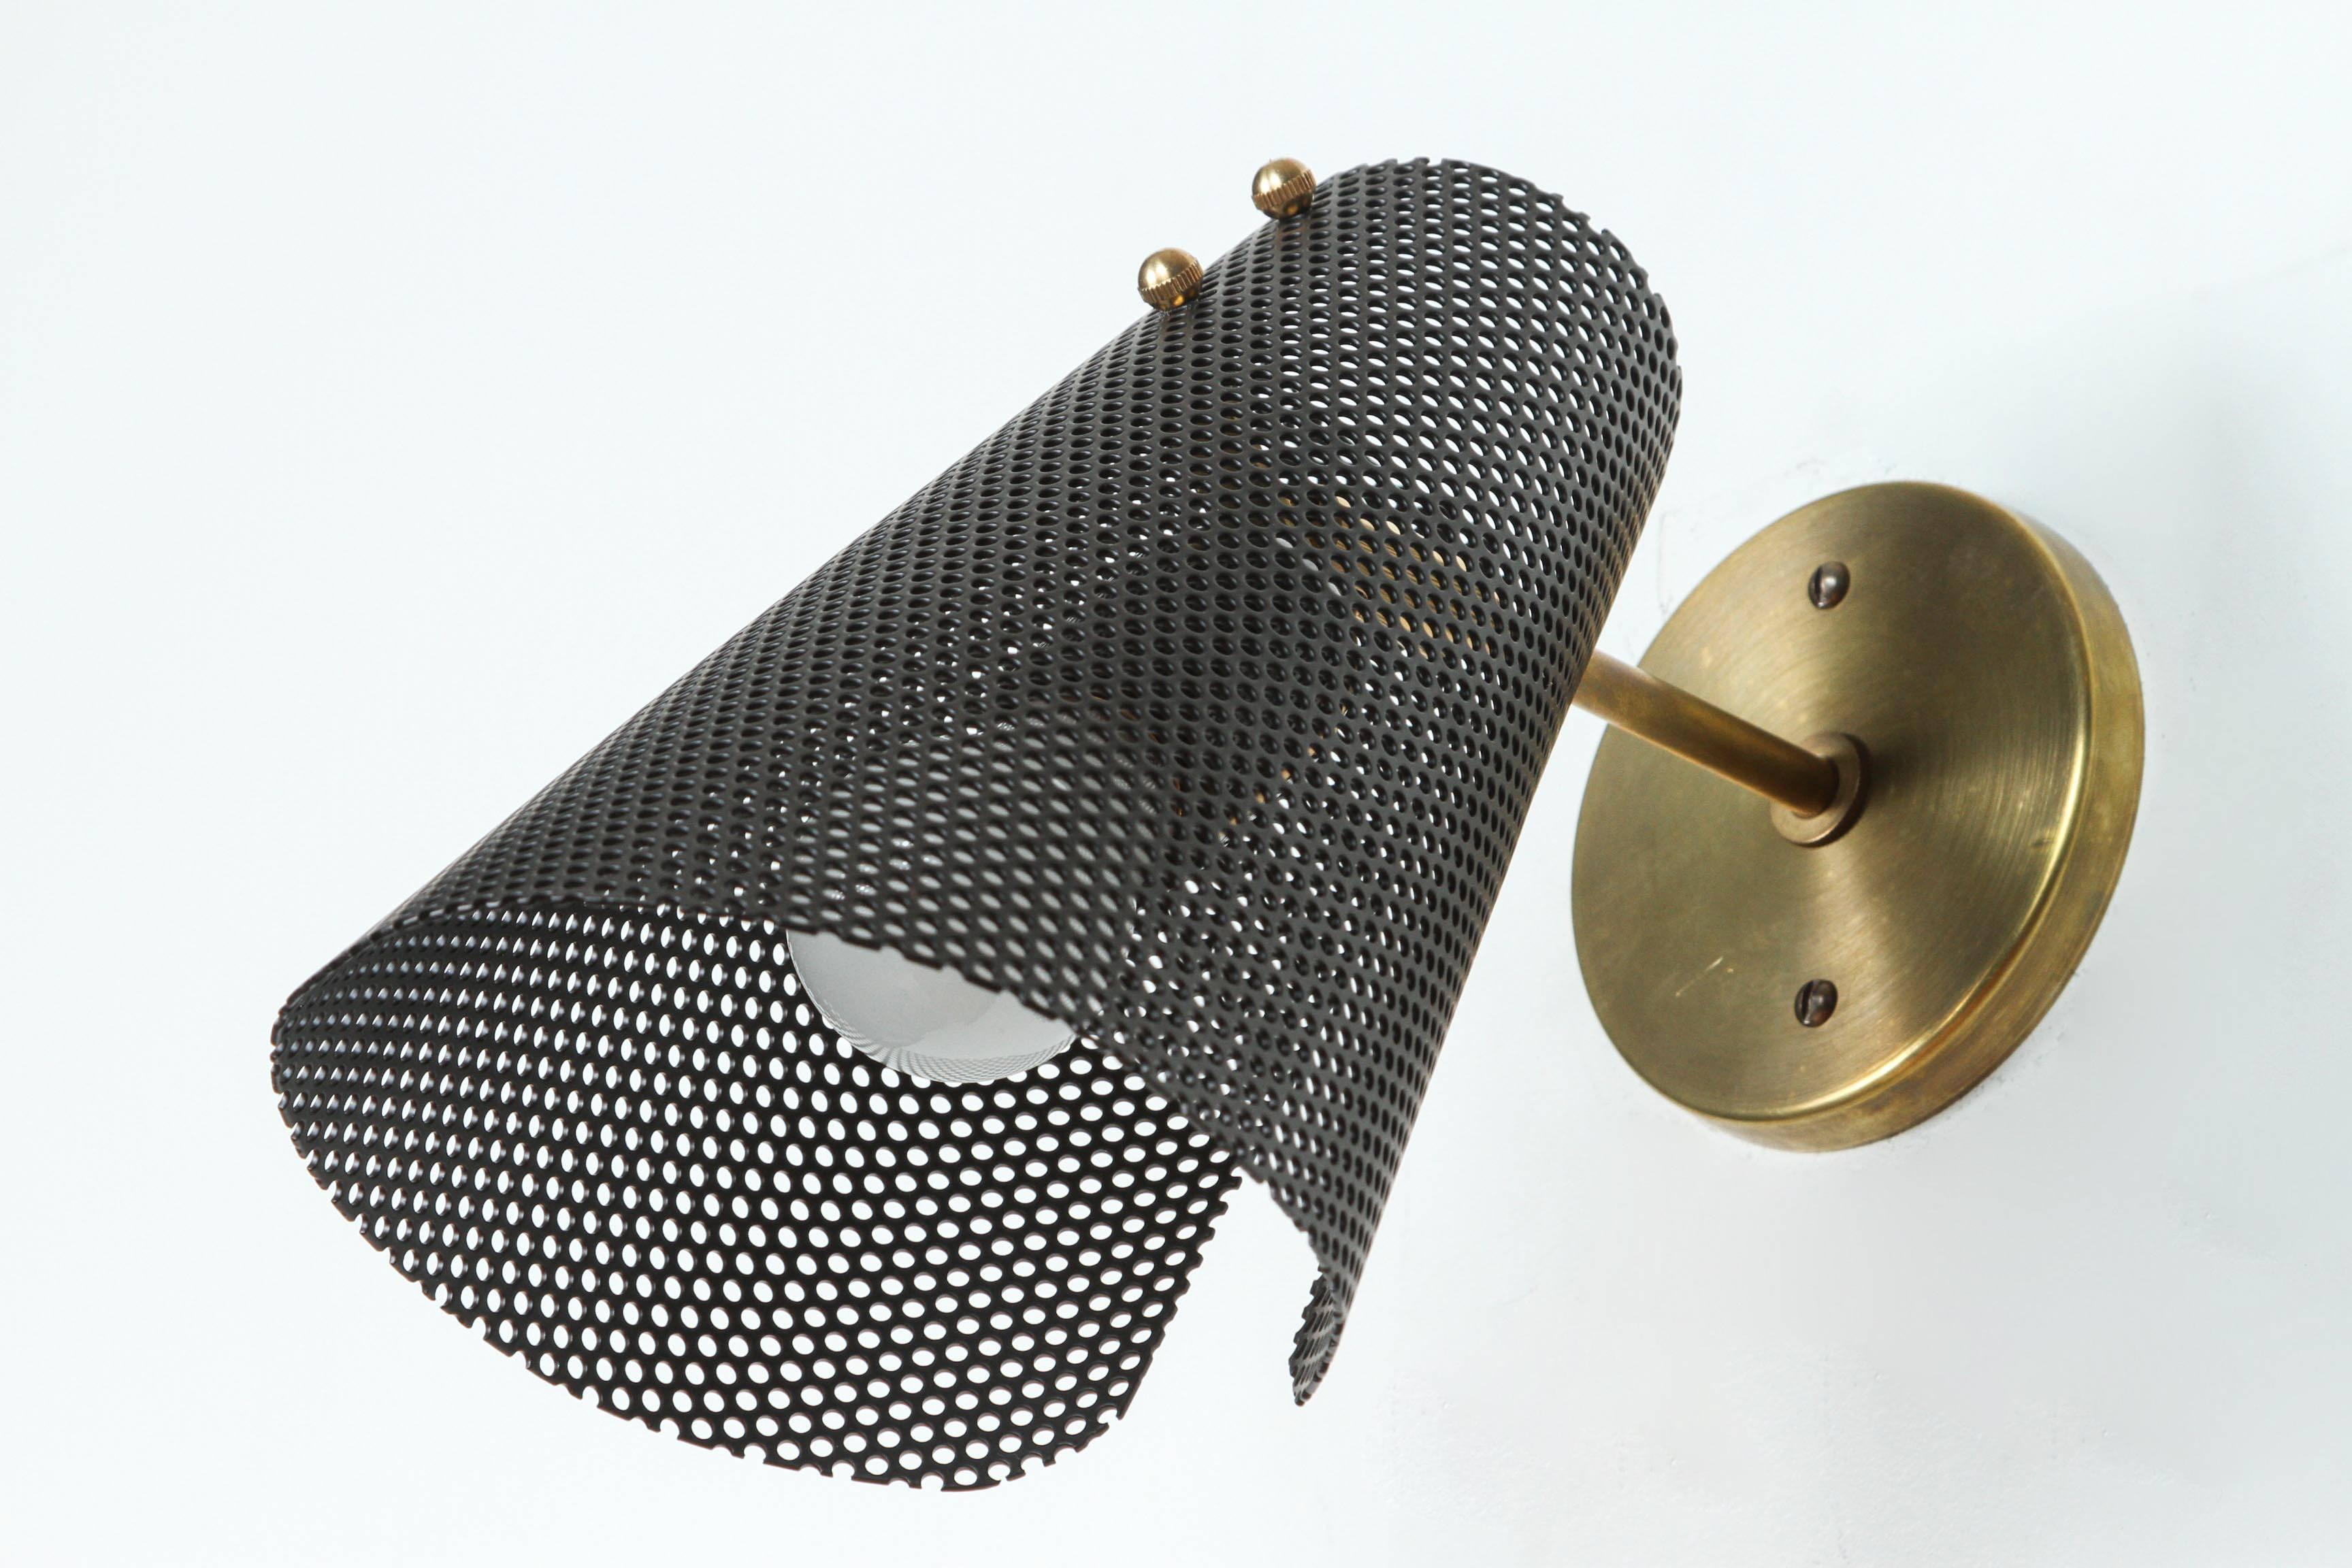 Brass Perferated Scoop Sconce by Lawson-Fenning